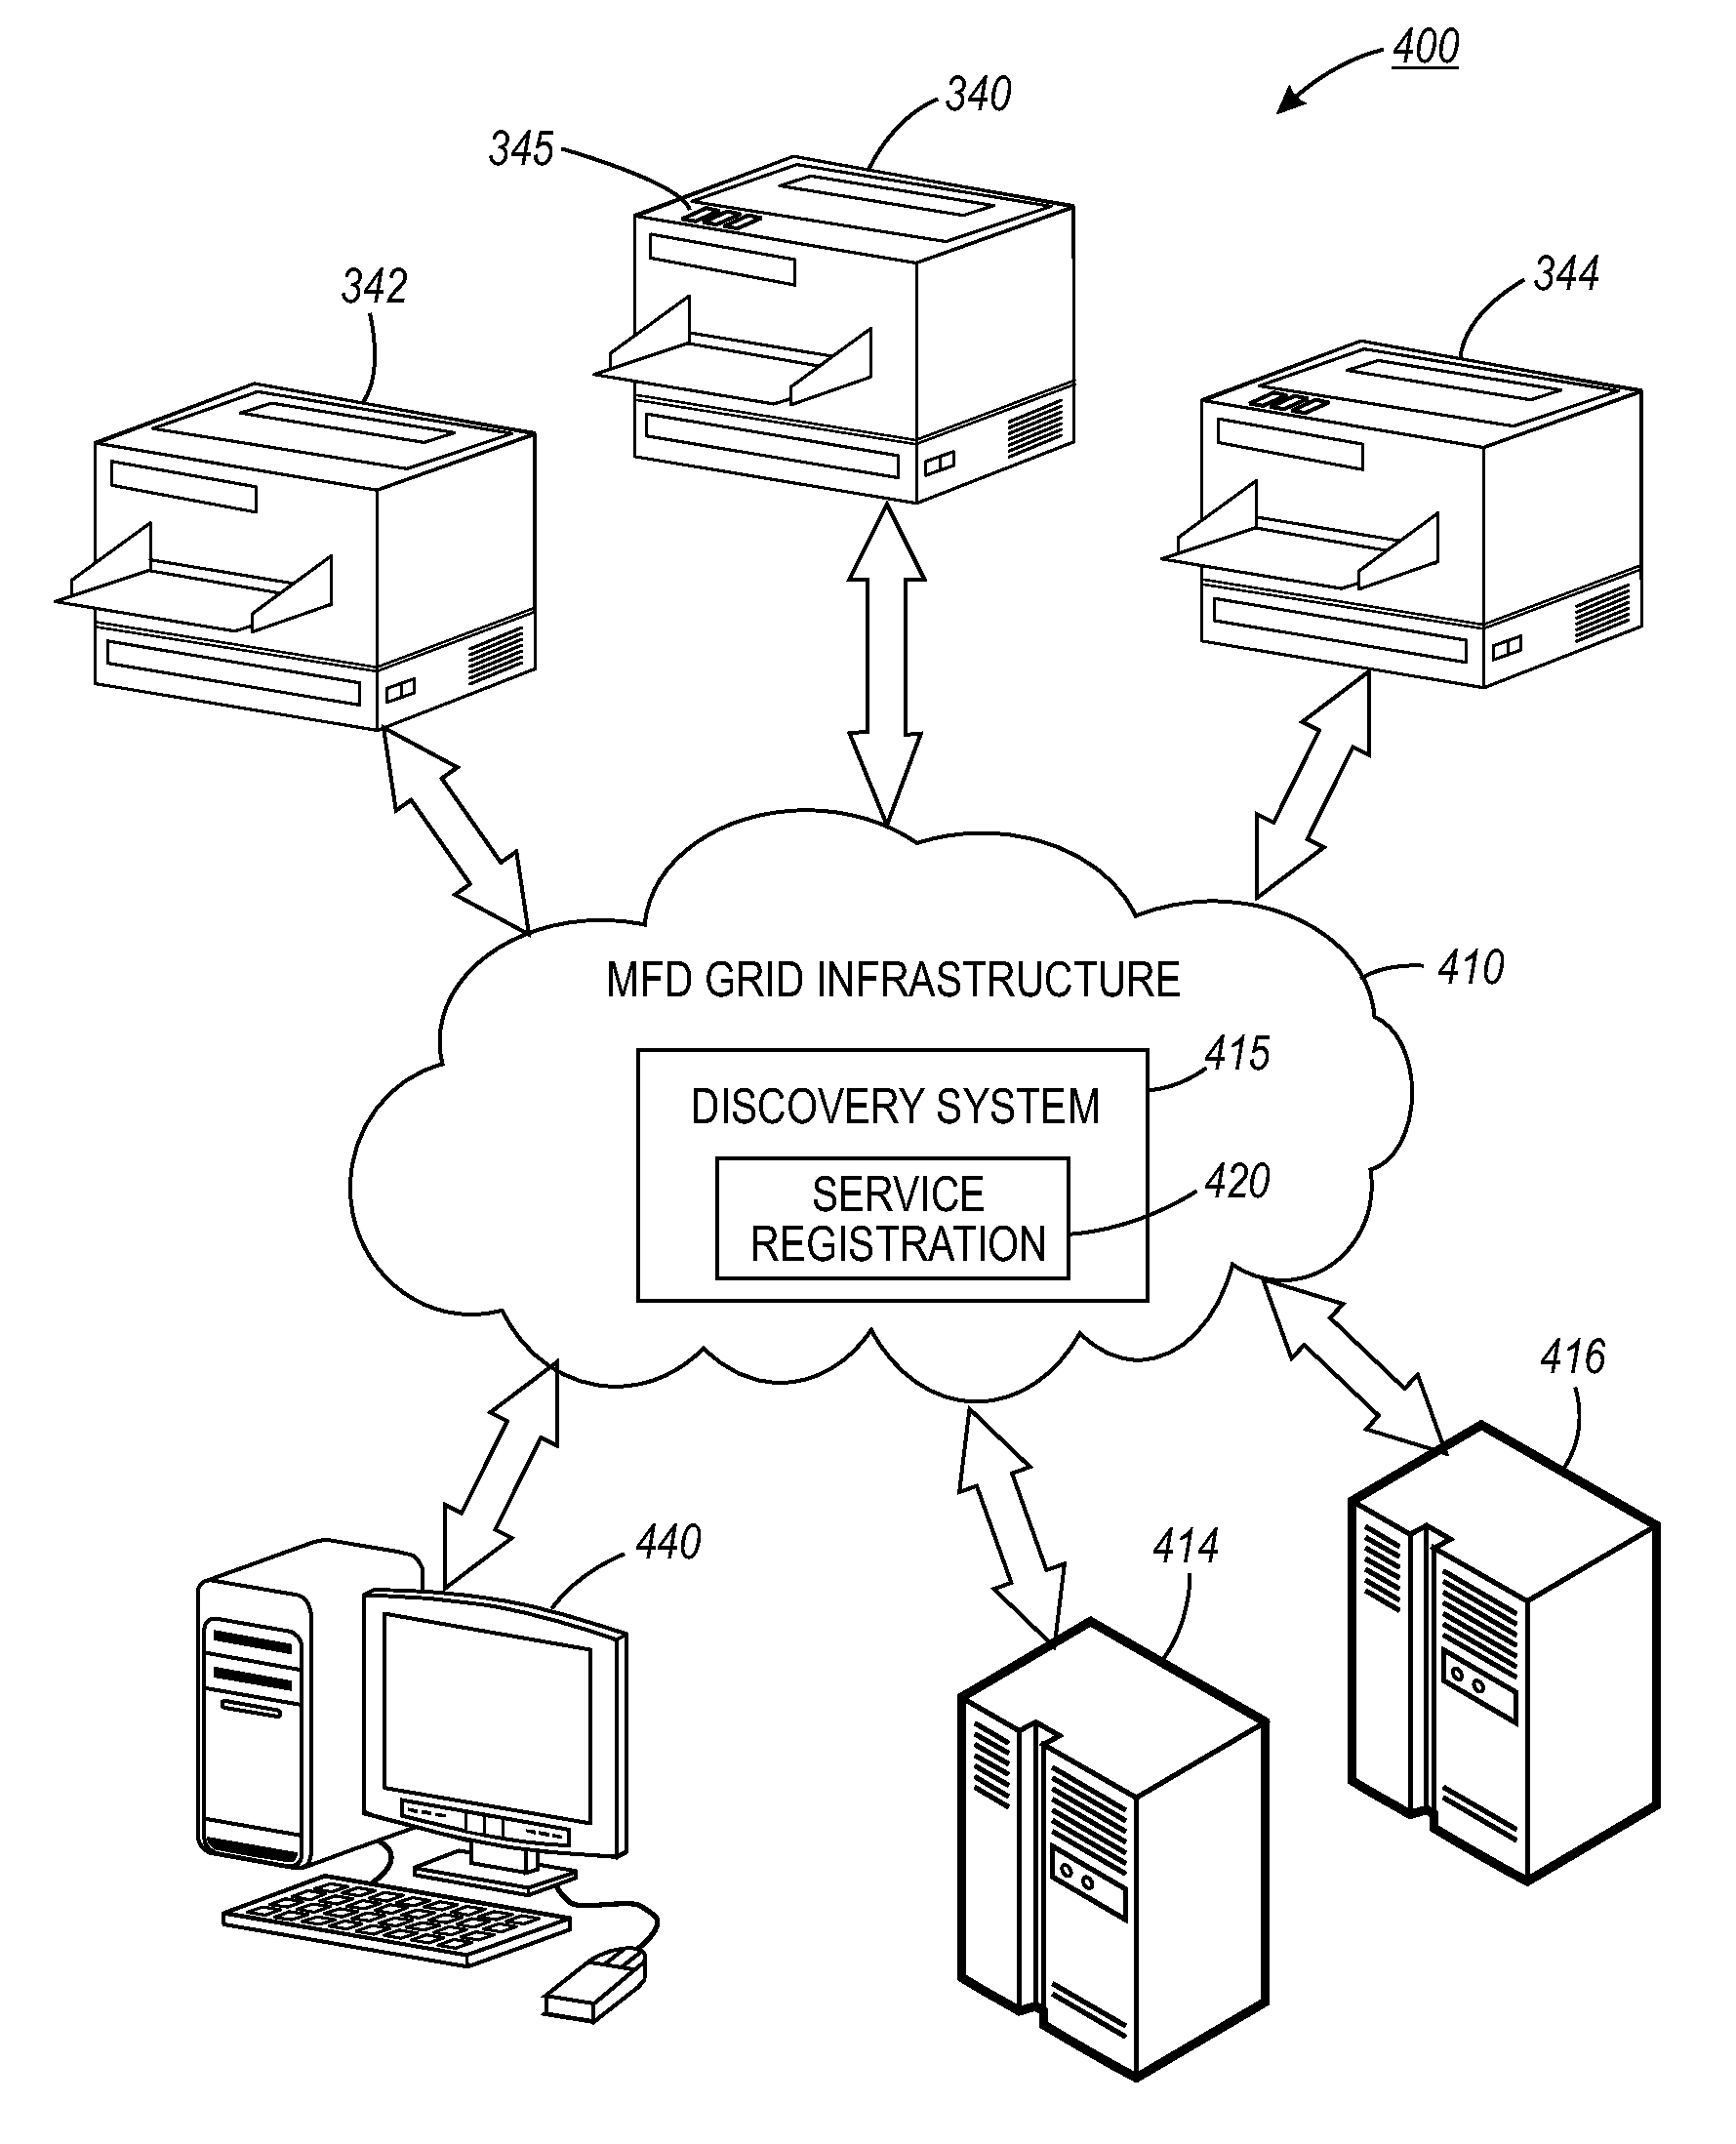 Method and system for automatic sharing and custom user interface features in a fleet of multi-function devices